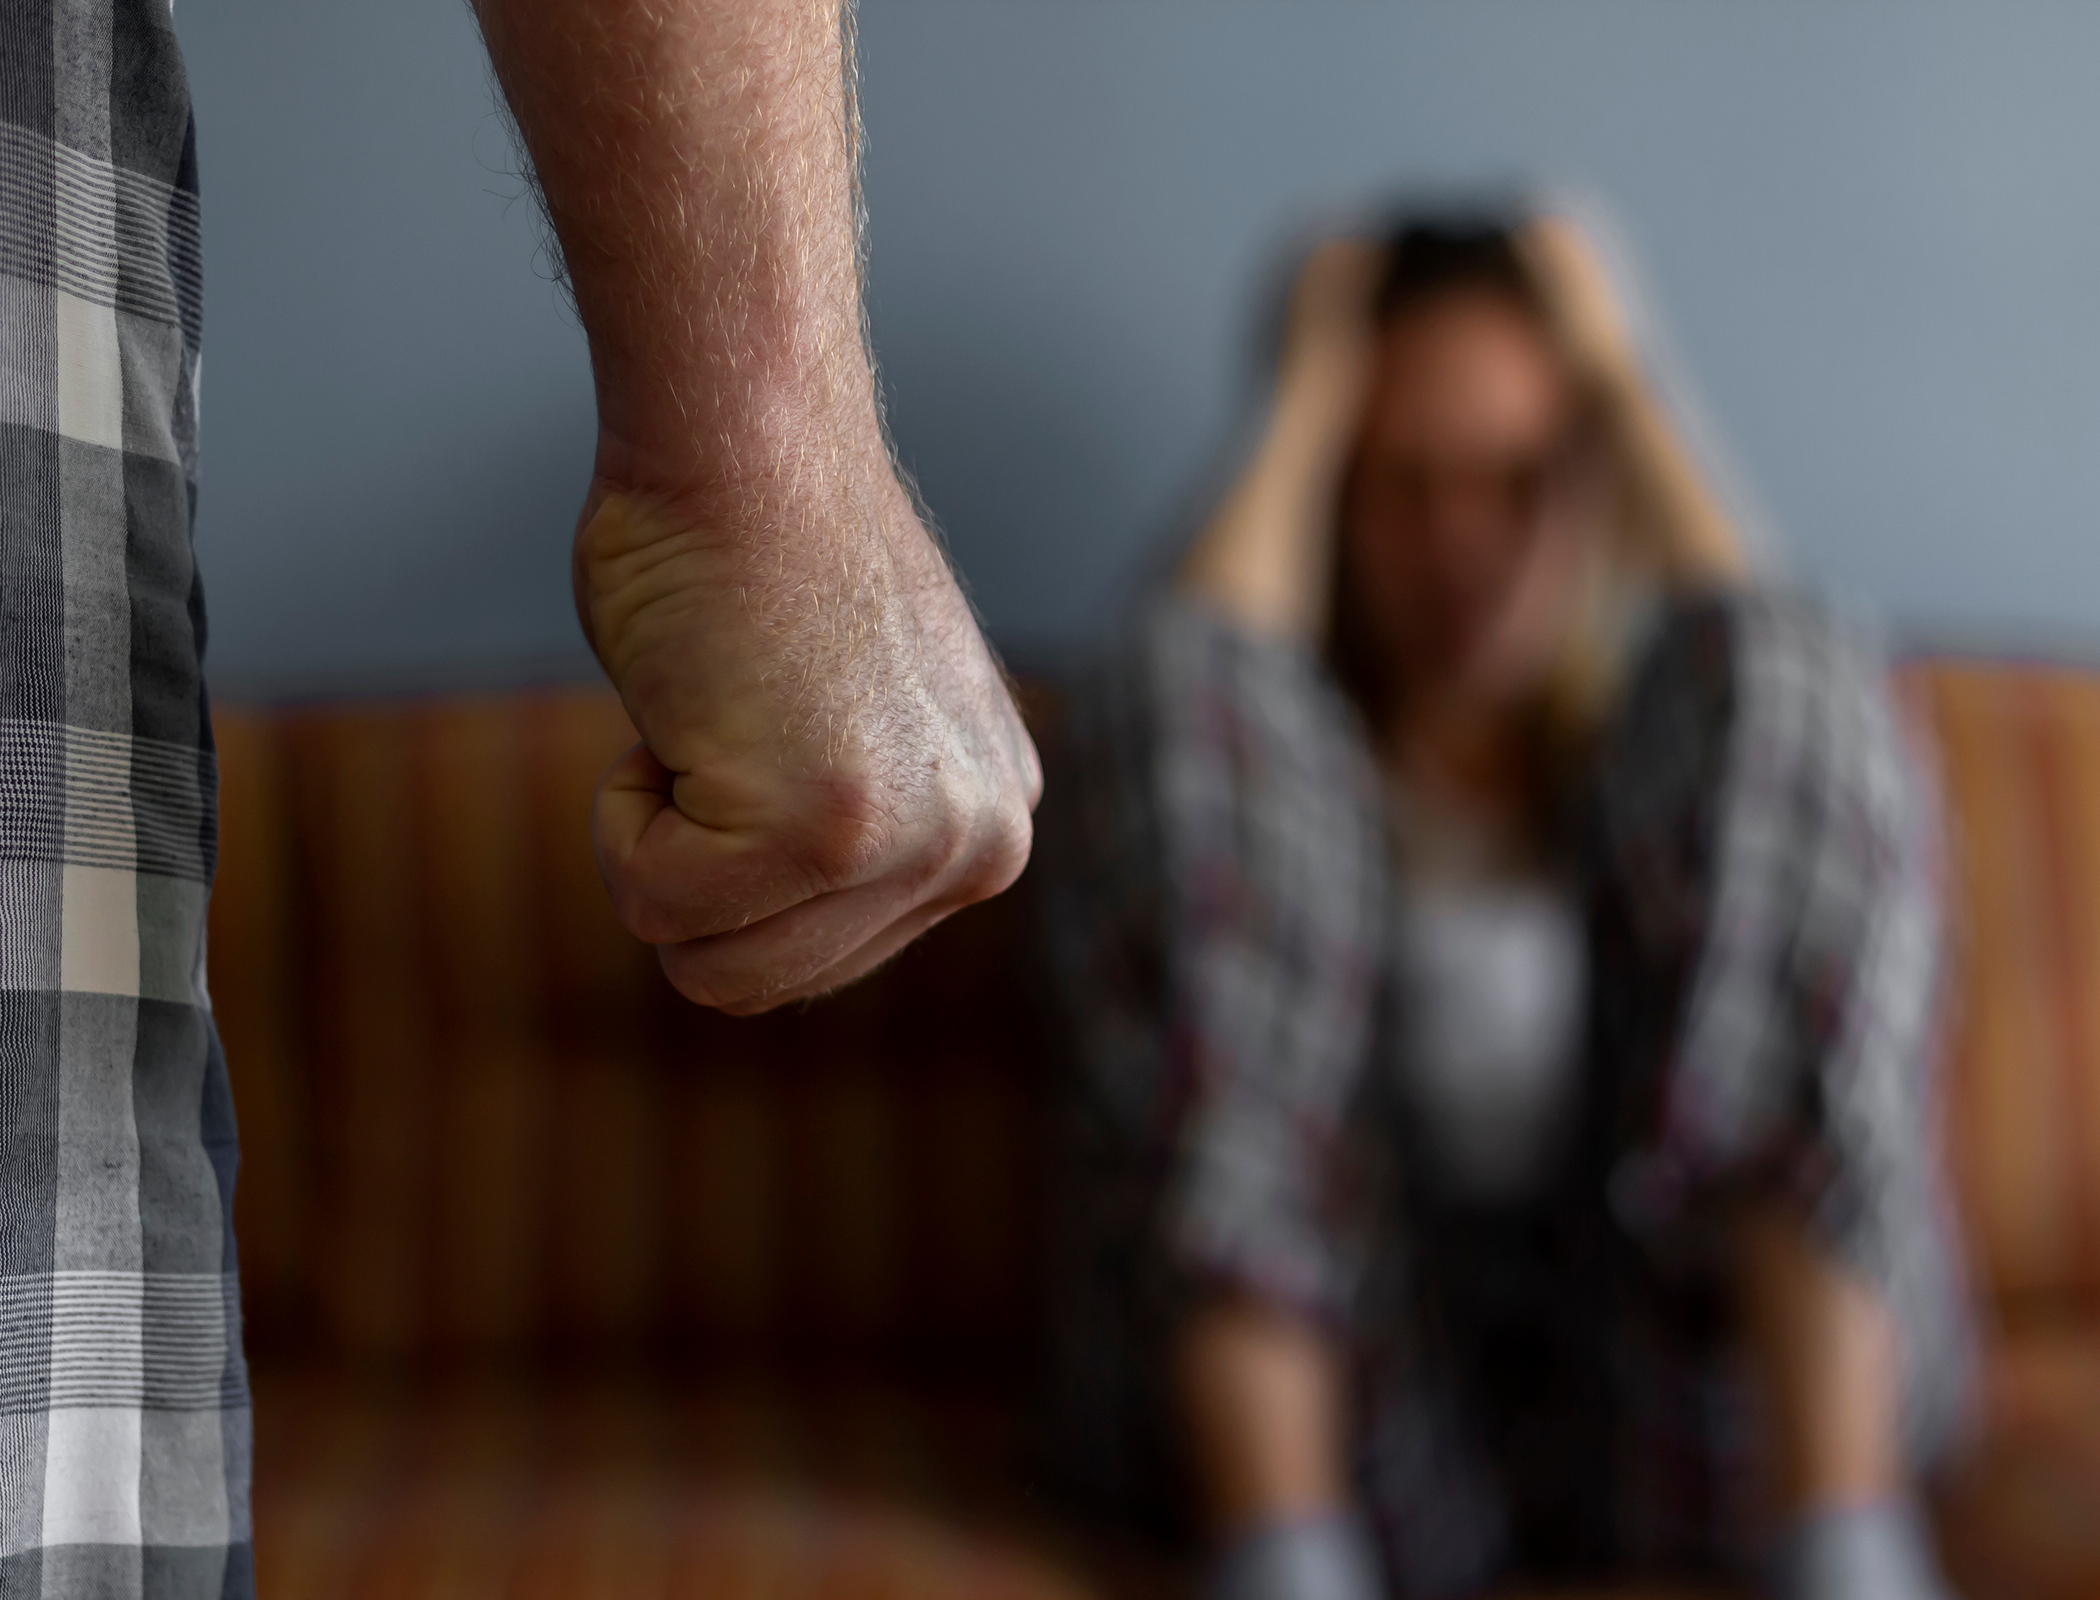 Most domestic abuse cases feature spyware and remote monitoring, MPs warn